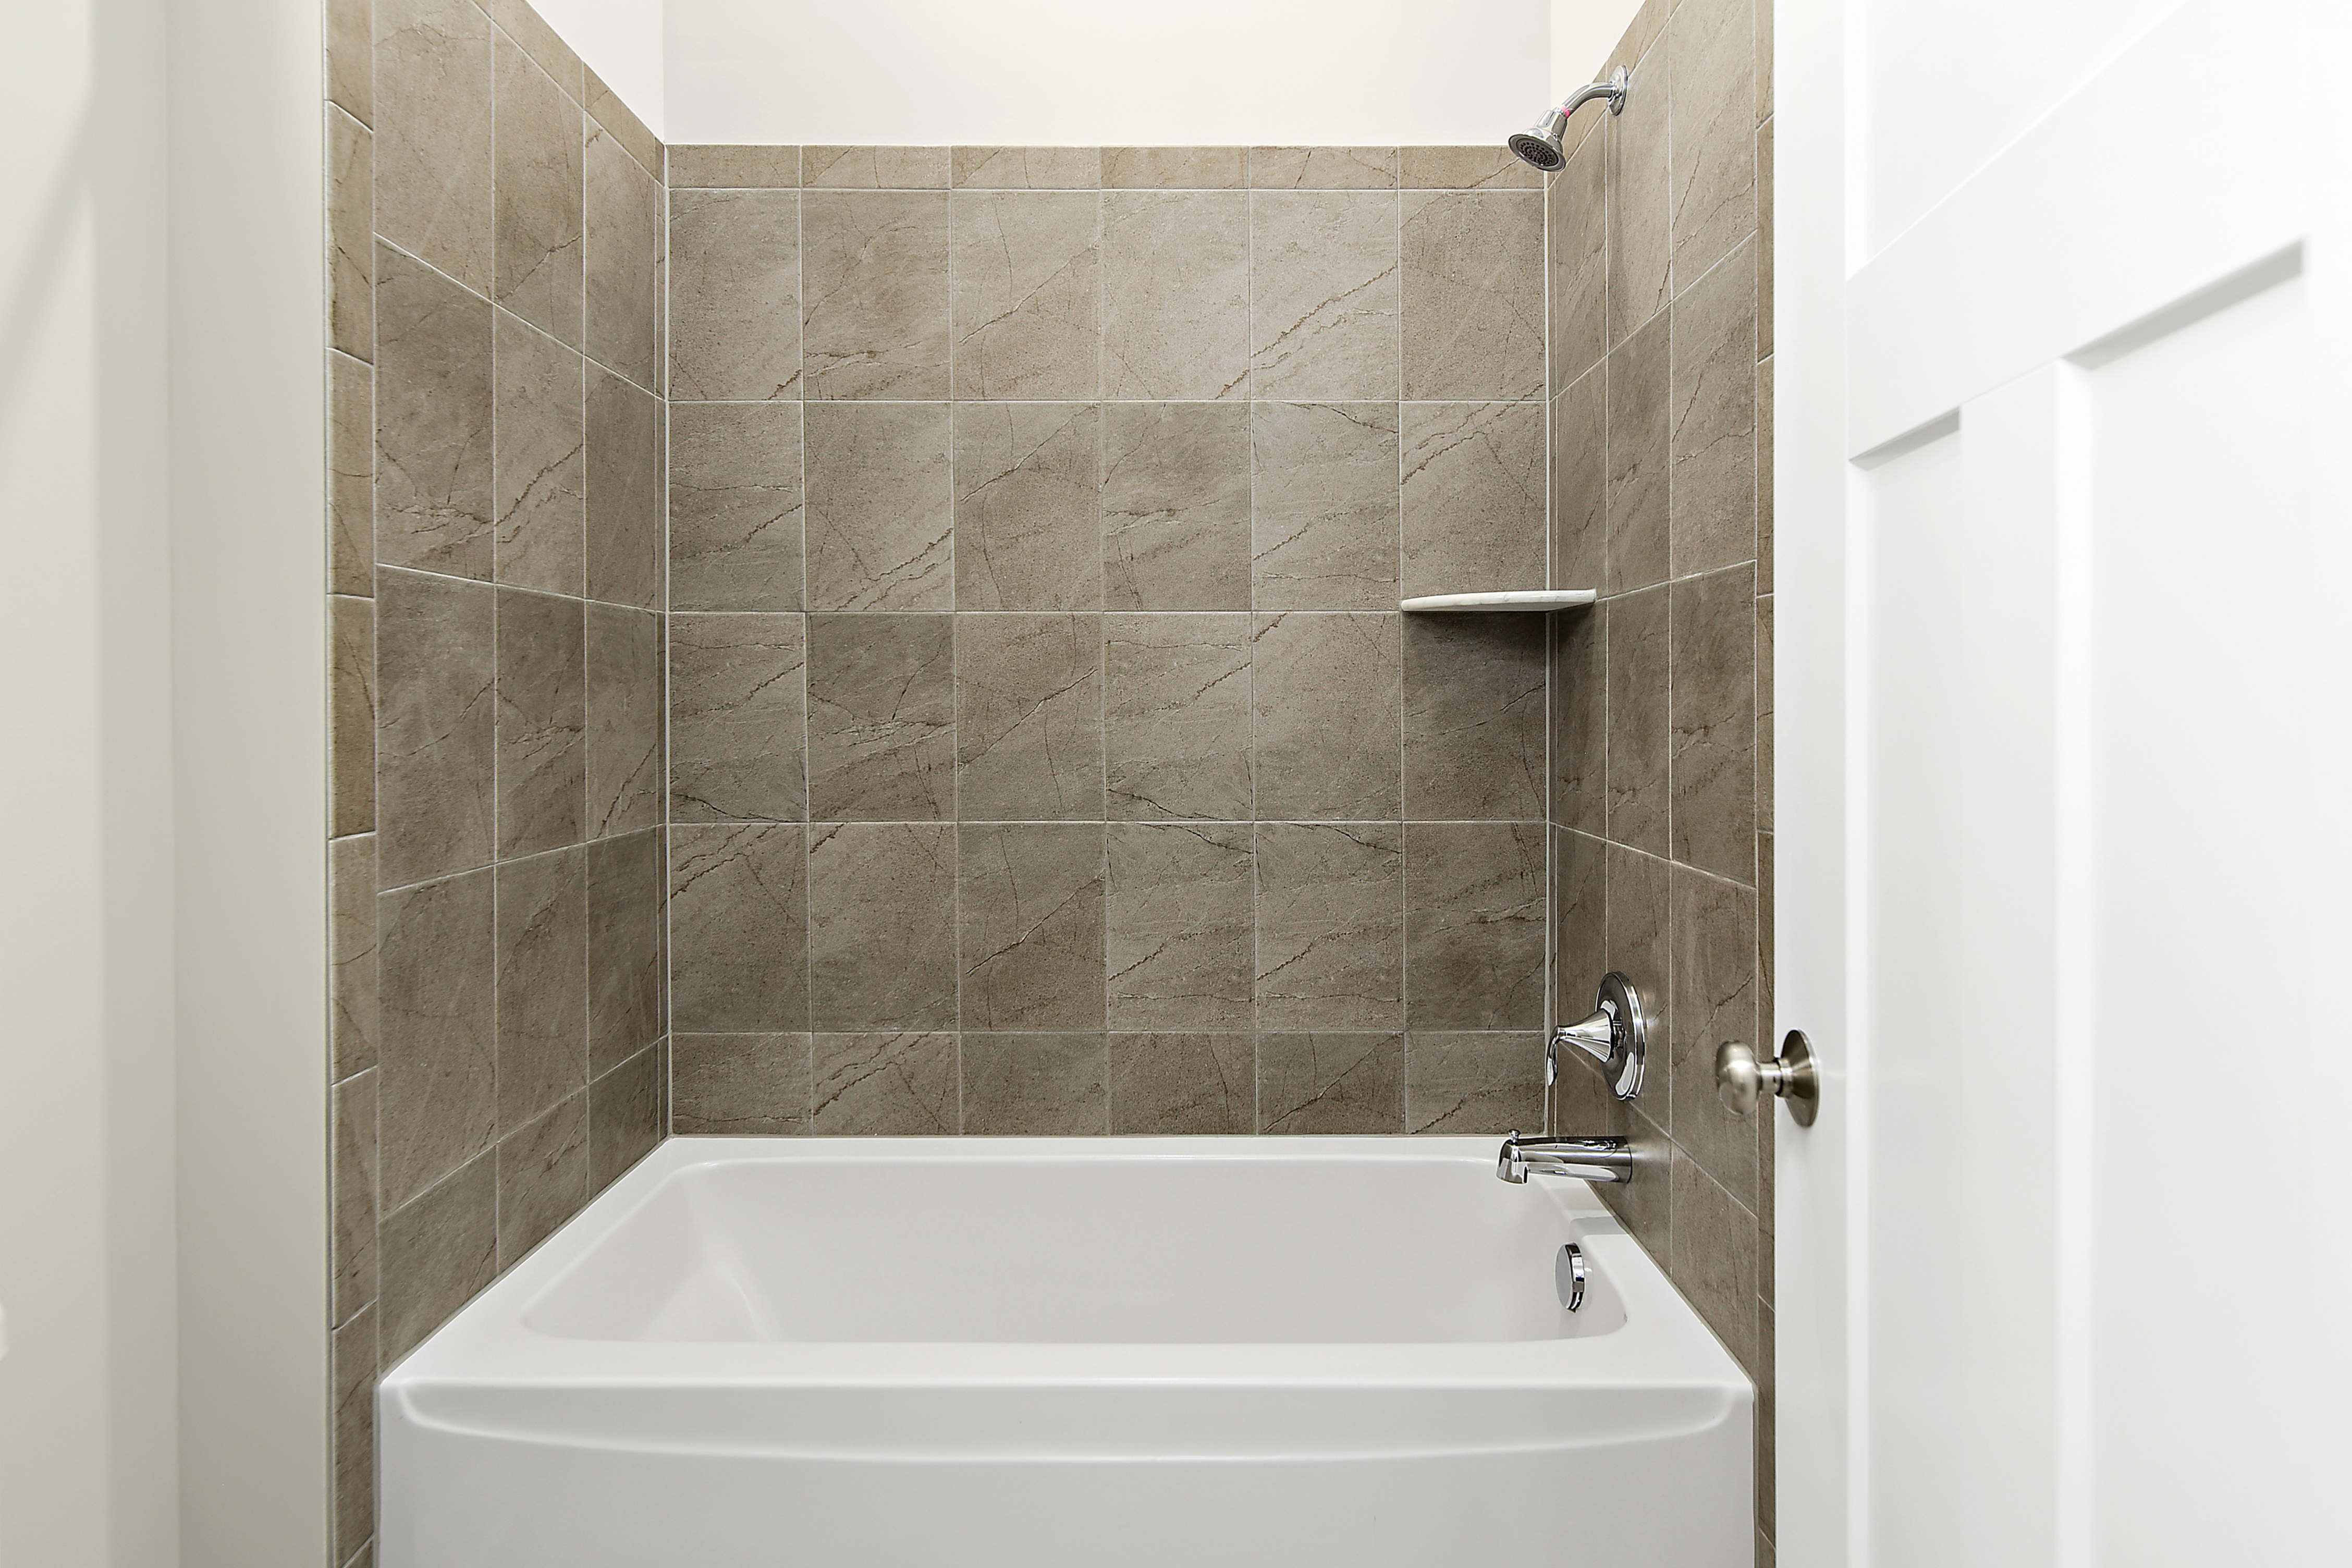 Combined shower and bathtub in bathroom of Turnstone floorplan, with white bathtub and grey brown tiles